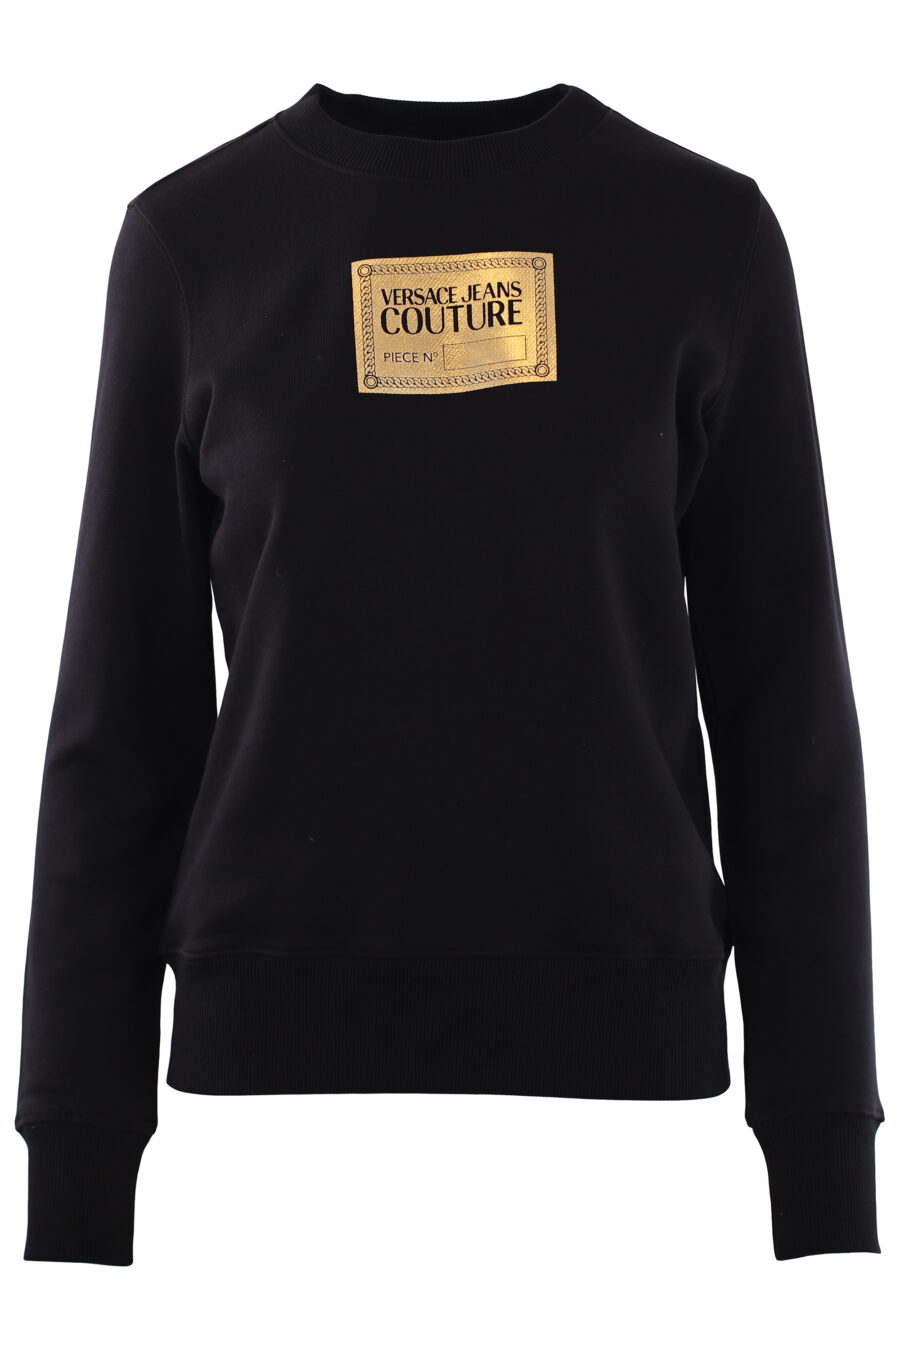 Black sweatshirt with gold plaque in the centre - IMG 0286